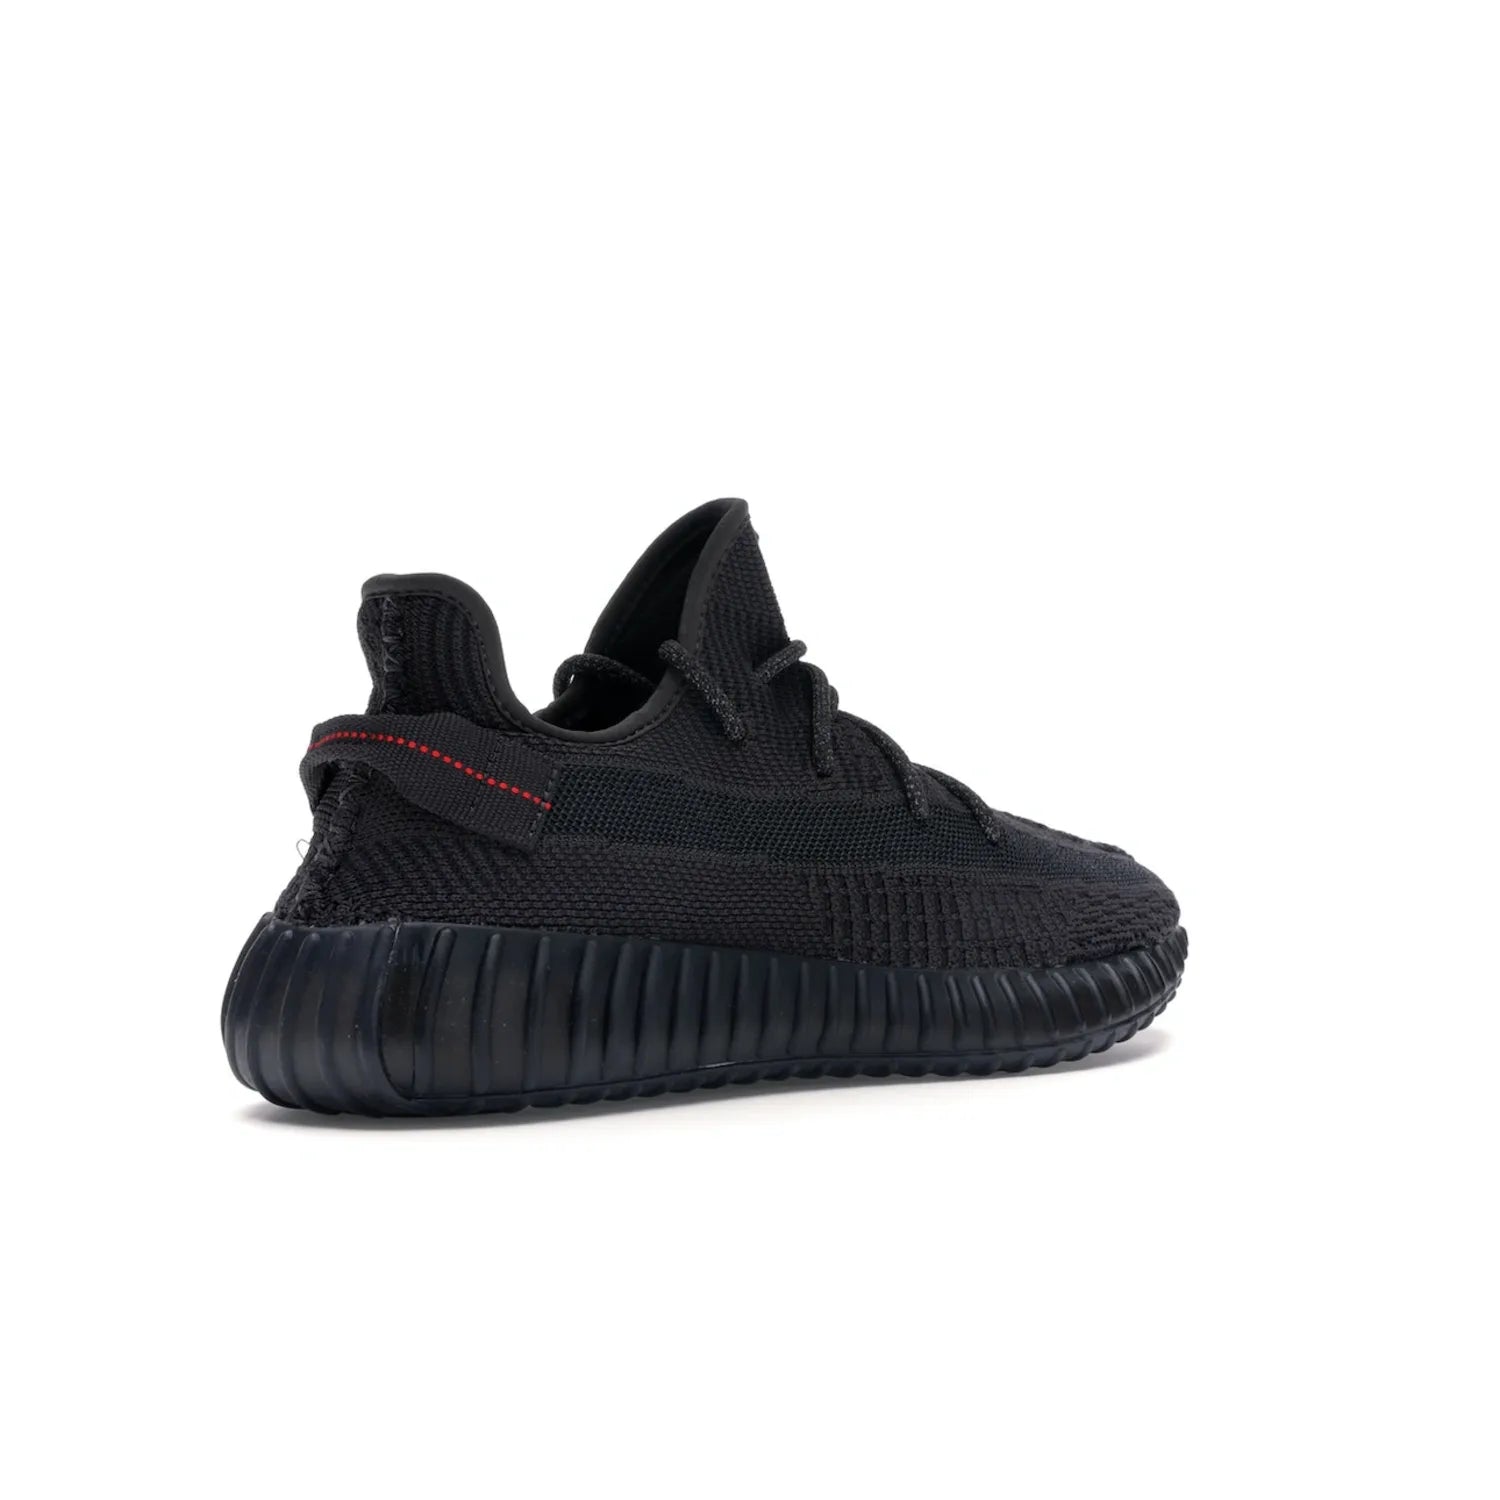 adidas Yeezy Boost 350 V2 Black (Non-Reflective) - Image 33 - Only at www.BallersClubKickz.com - A timeless, sleek silhouette crafted from quality materials. The adidas Yeezy Boost 350 V2 Black (Non-Reflective) brings style and sophistication. Get yours now!